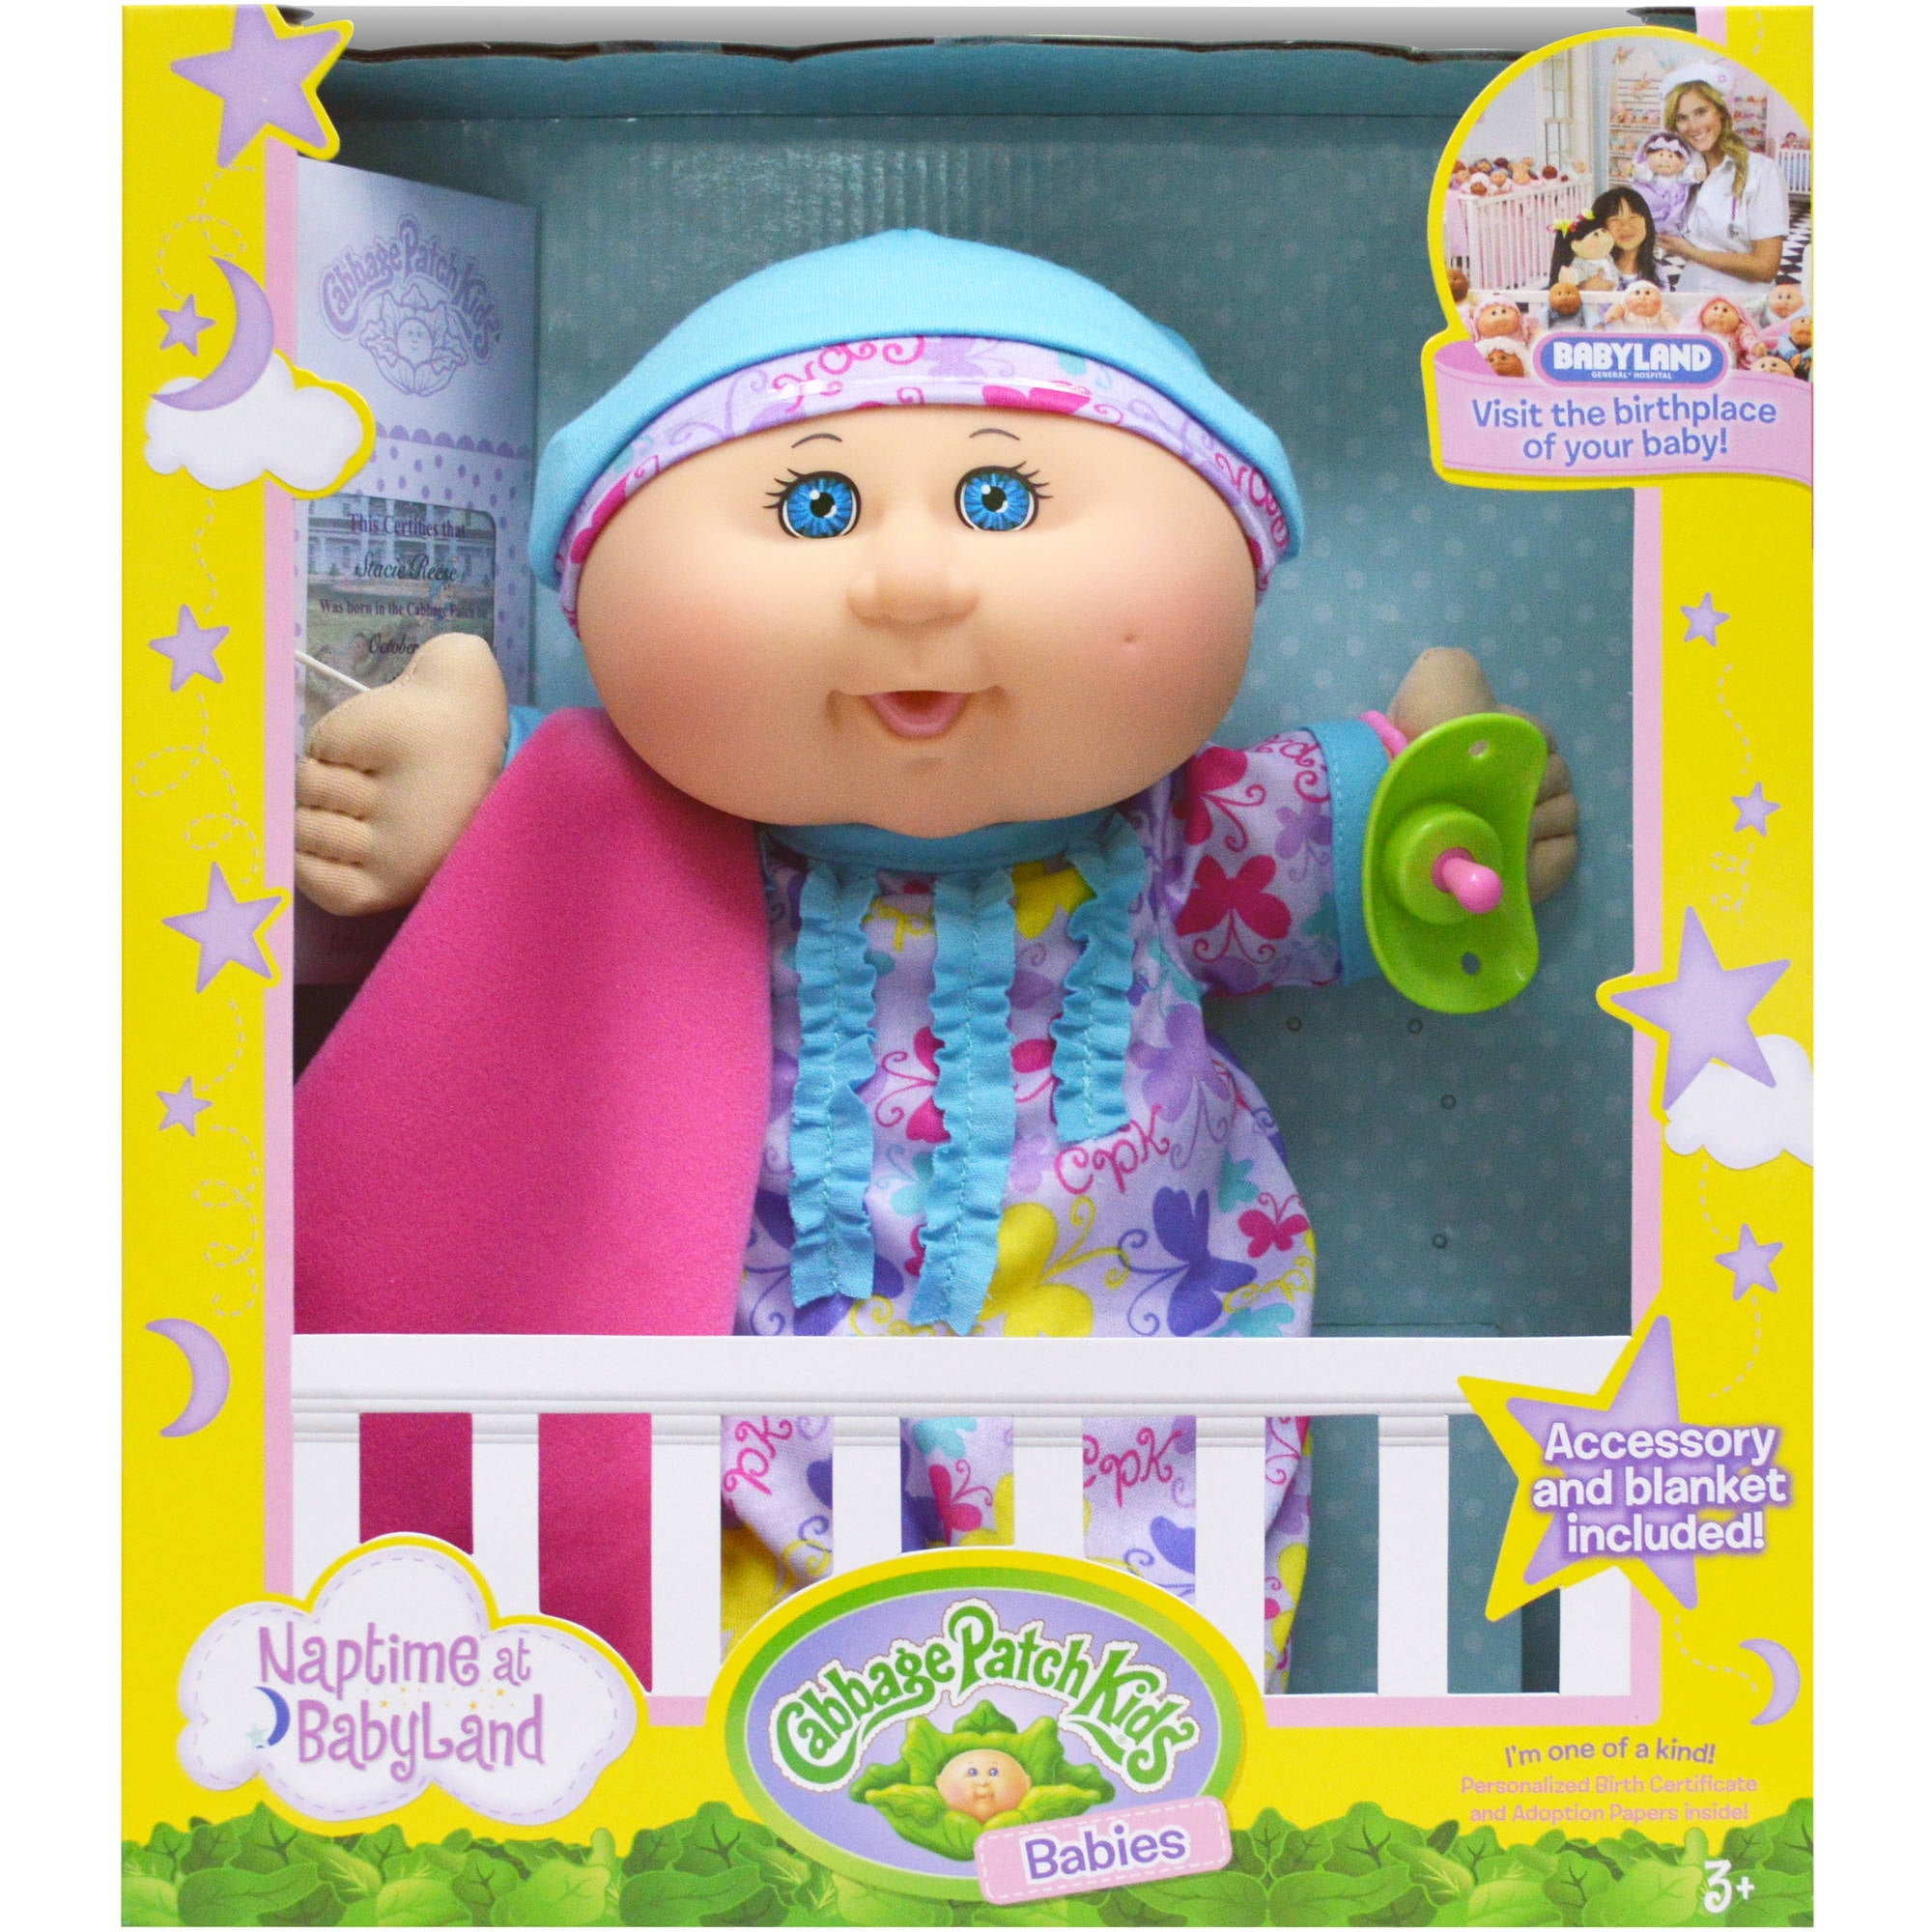 cabbage patch baby shower